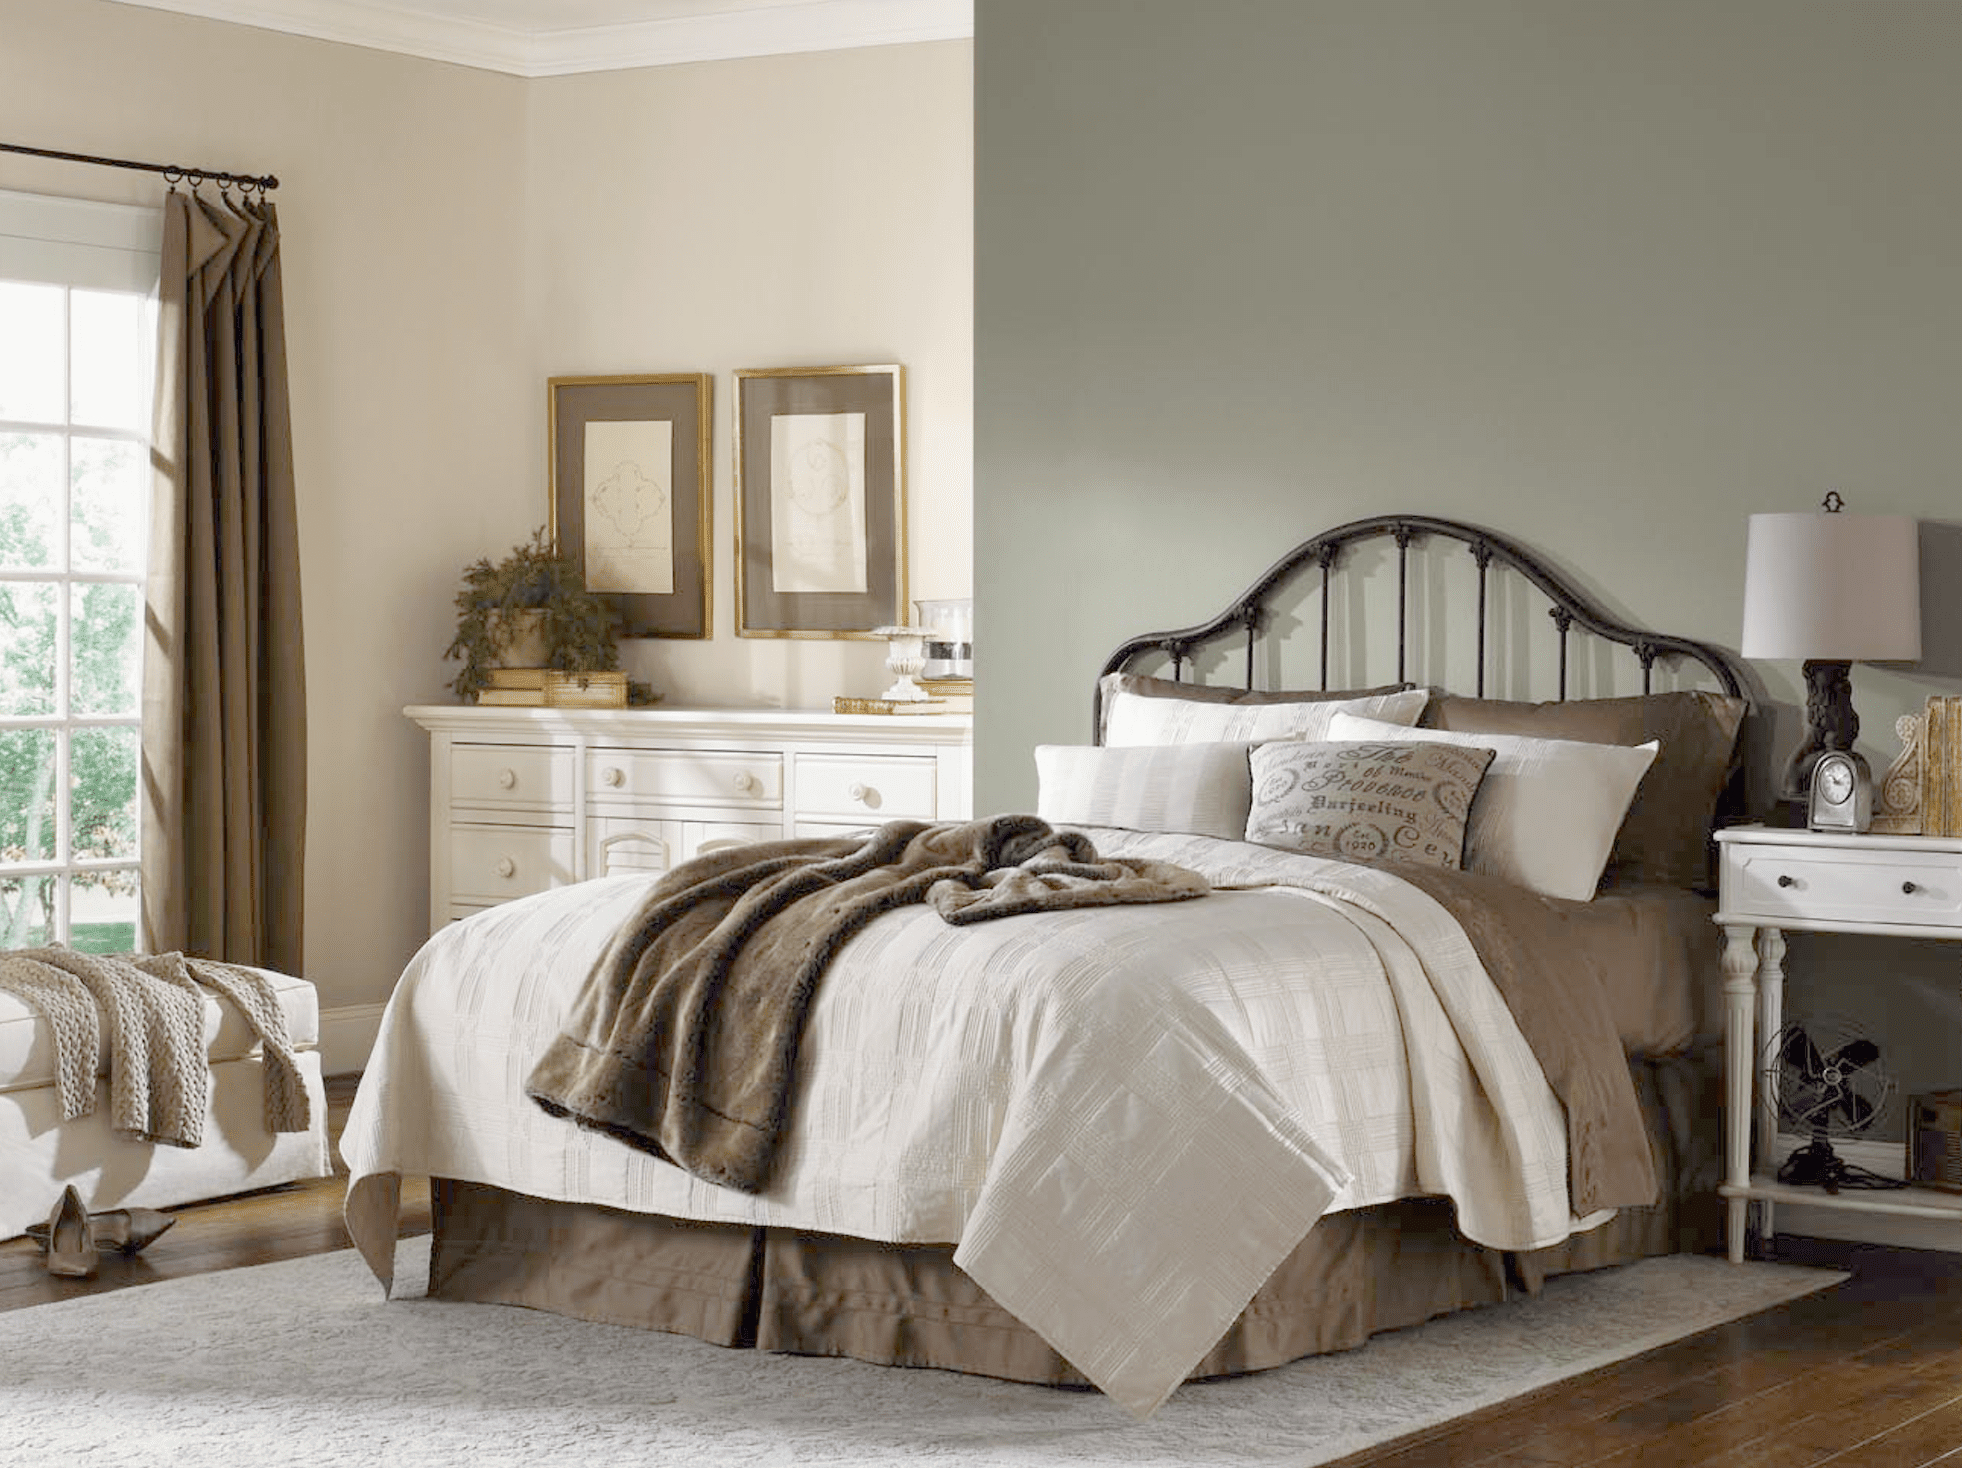 8 Relaxing Sherwin Williams Paint Colors For Bedrooms pertaining to sizing 1962 X 1468